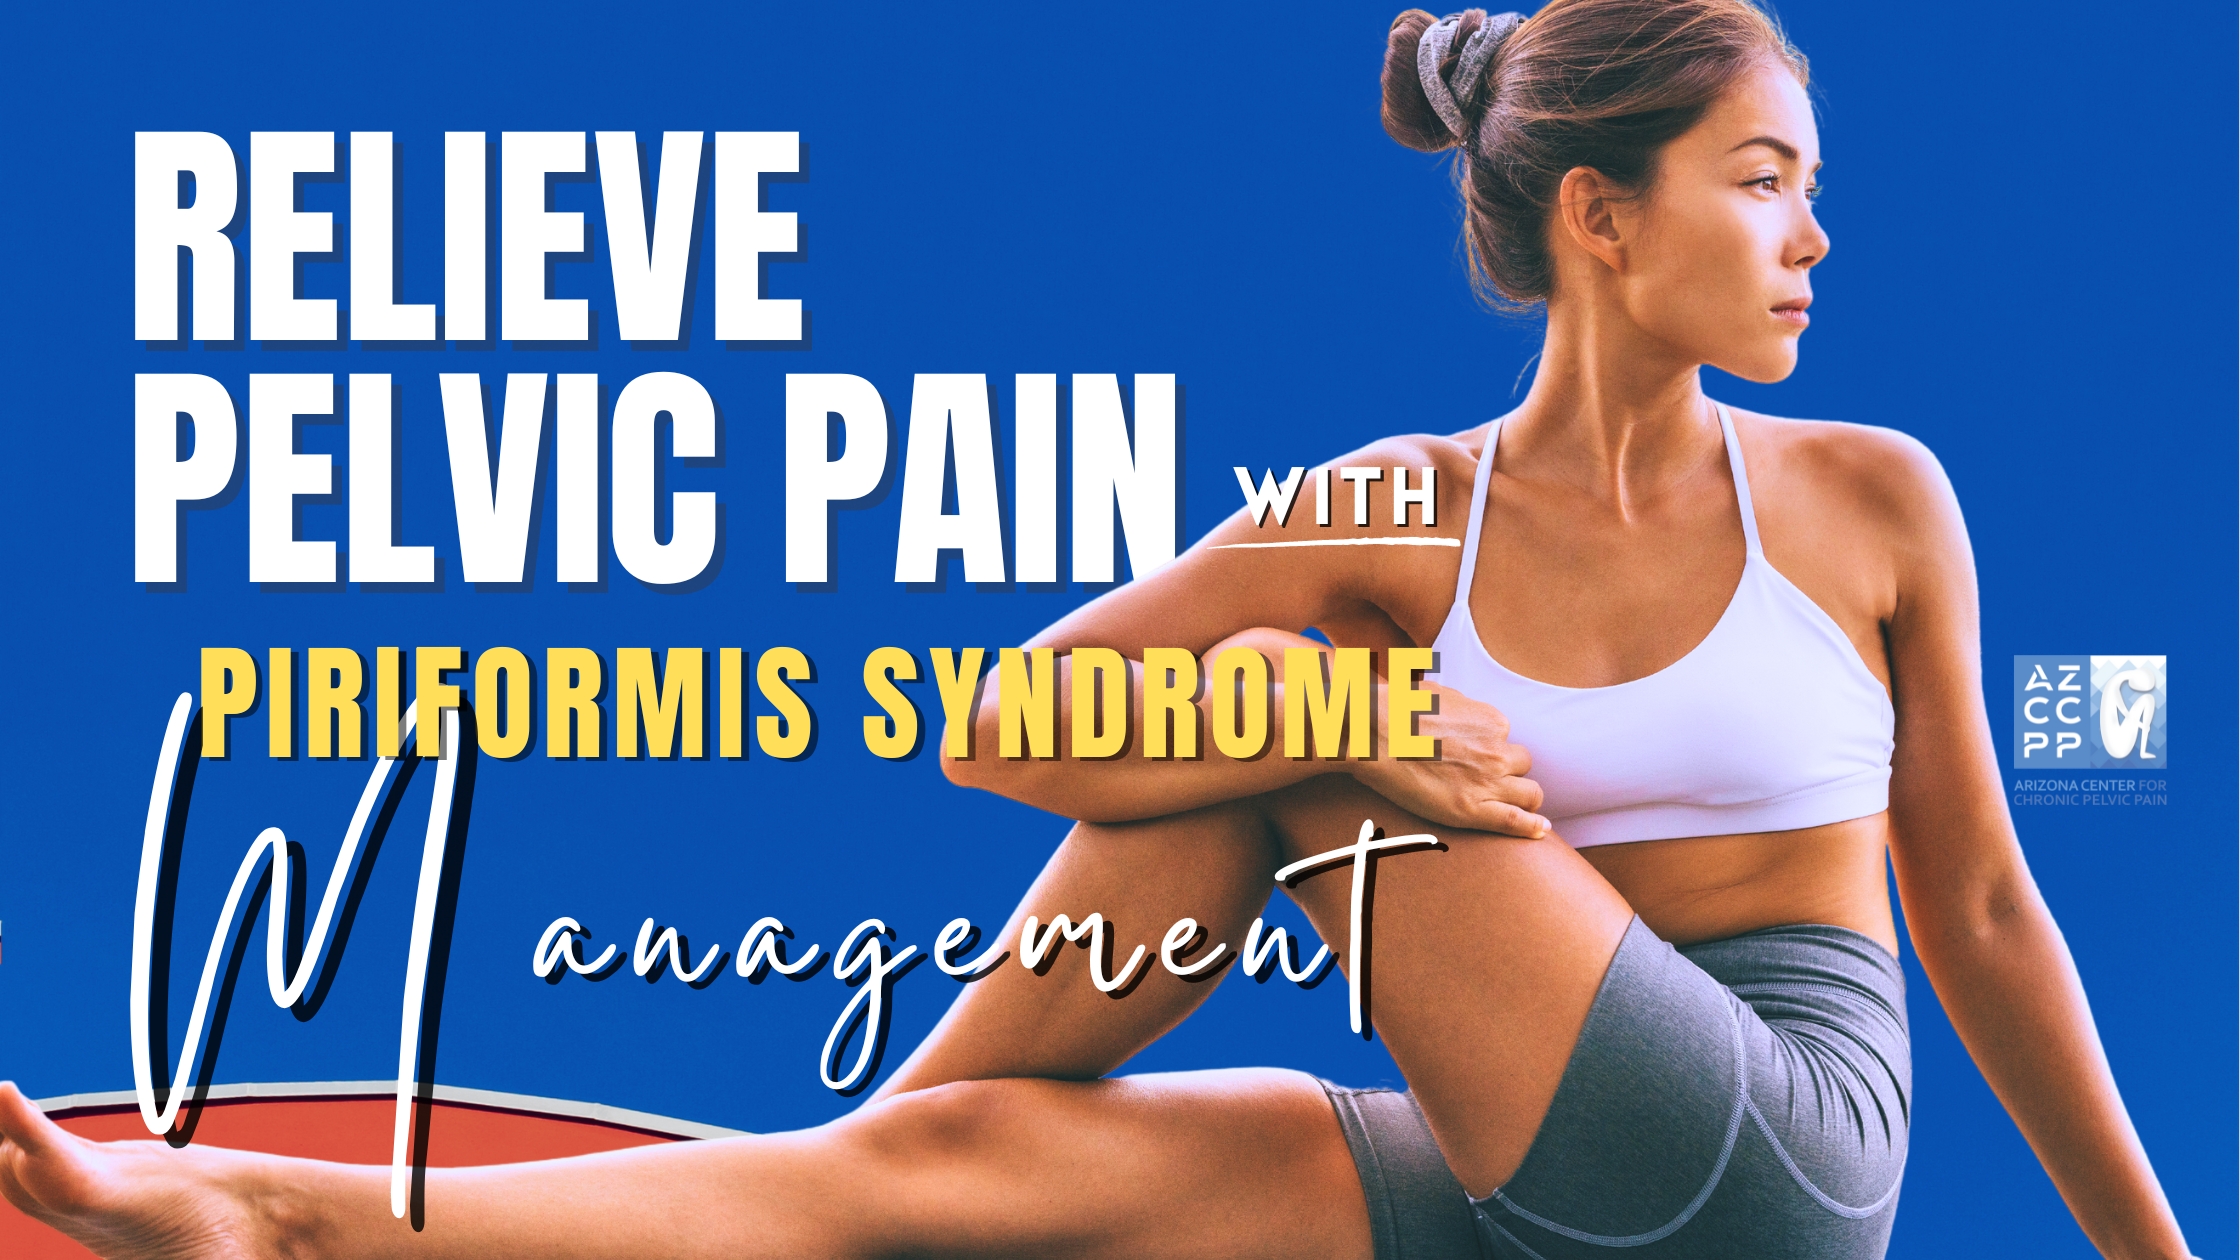 Stretches and Exercise for Sciatic Pain from Piriformis Syndrome